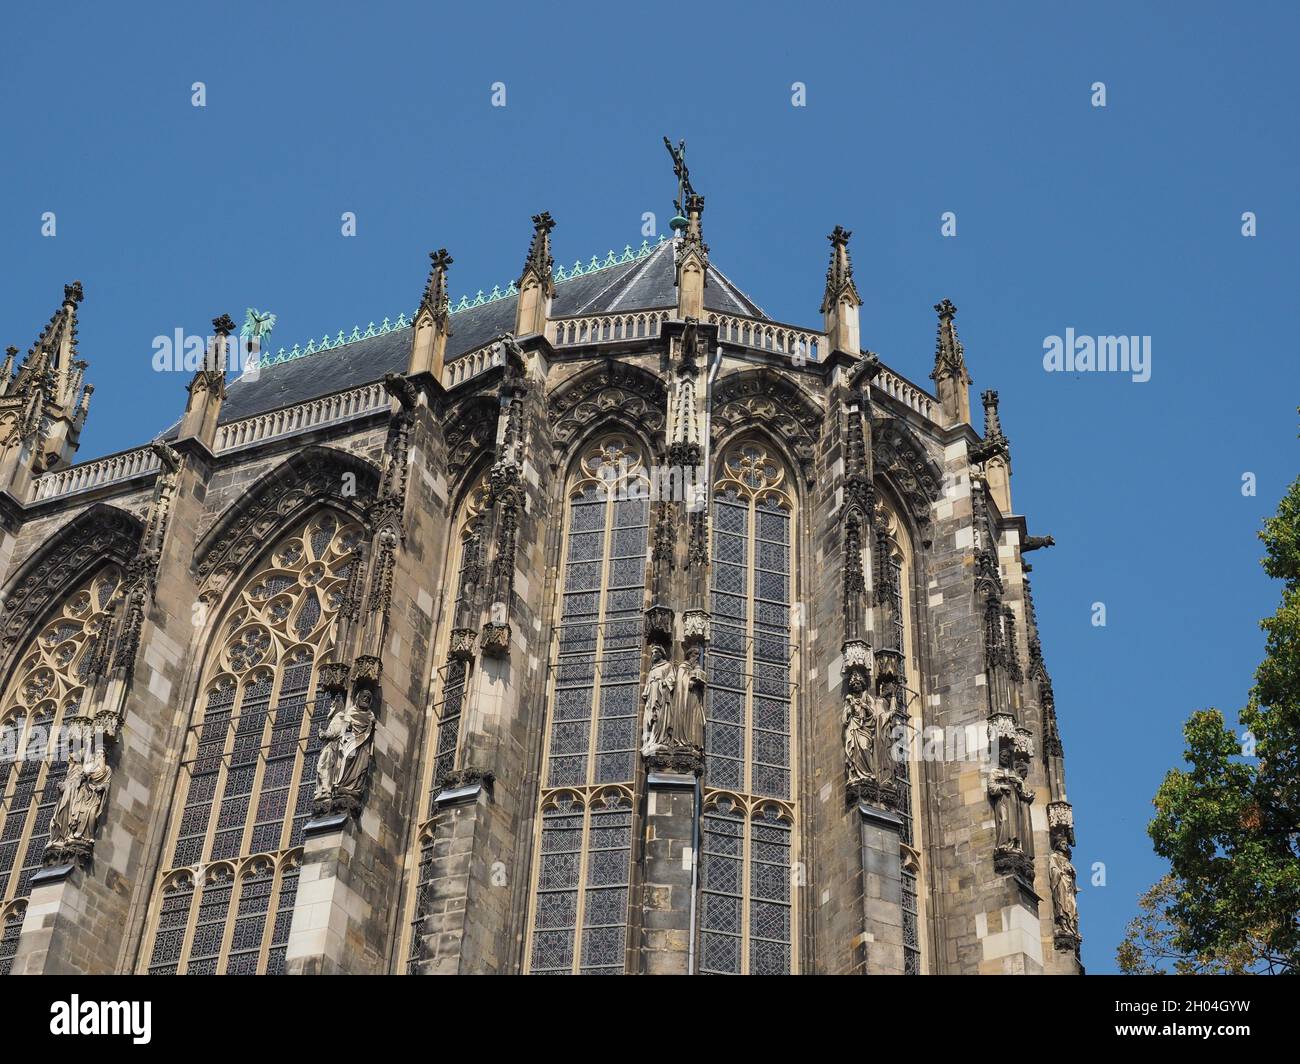 Aachener Dom cathedral church in Aachen, Germany. Stock Photo